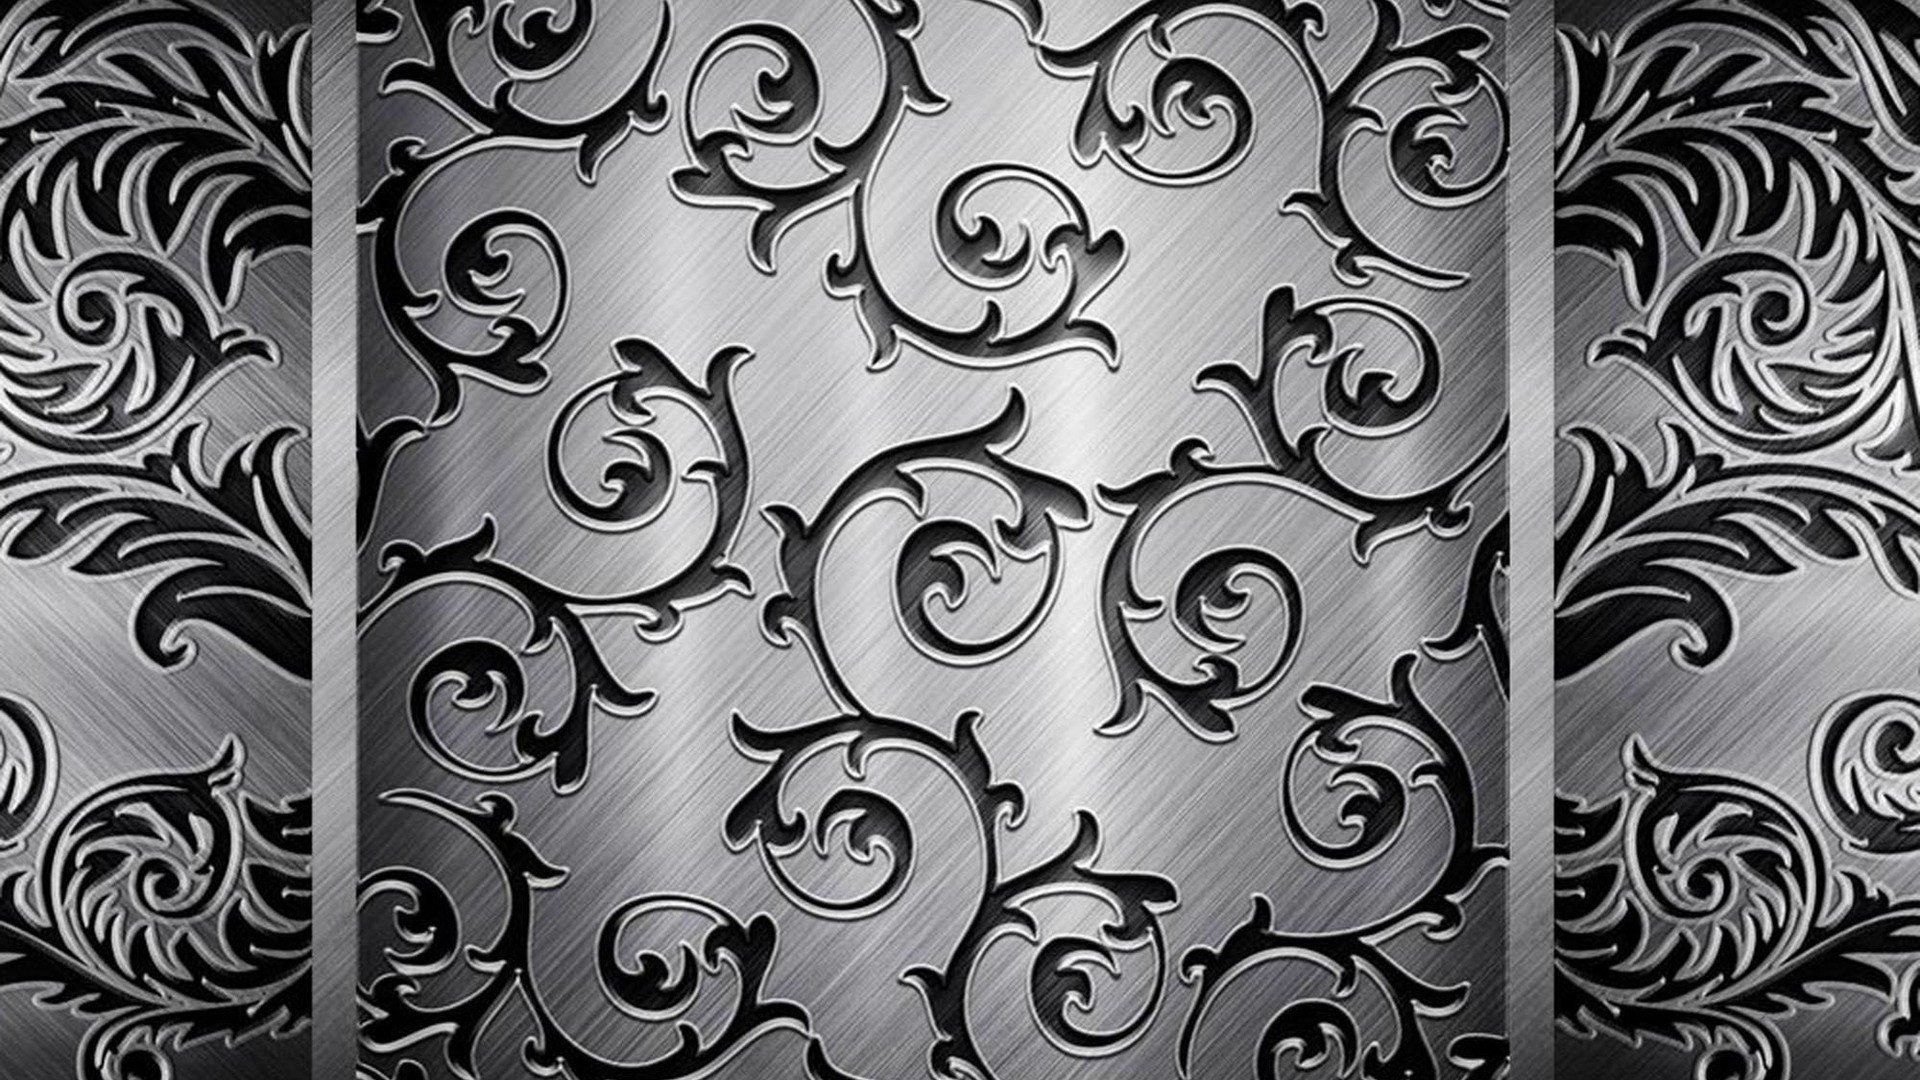 Download Black And White Patterns Wallpaper Full HD Backgrounds